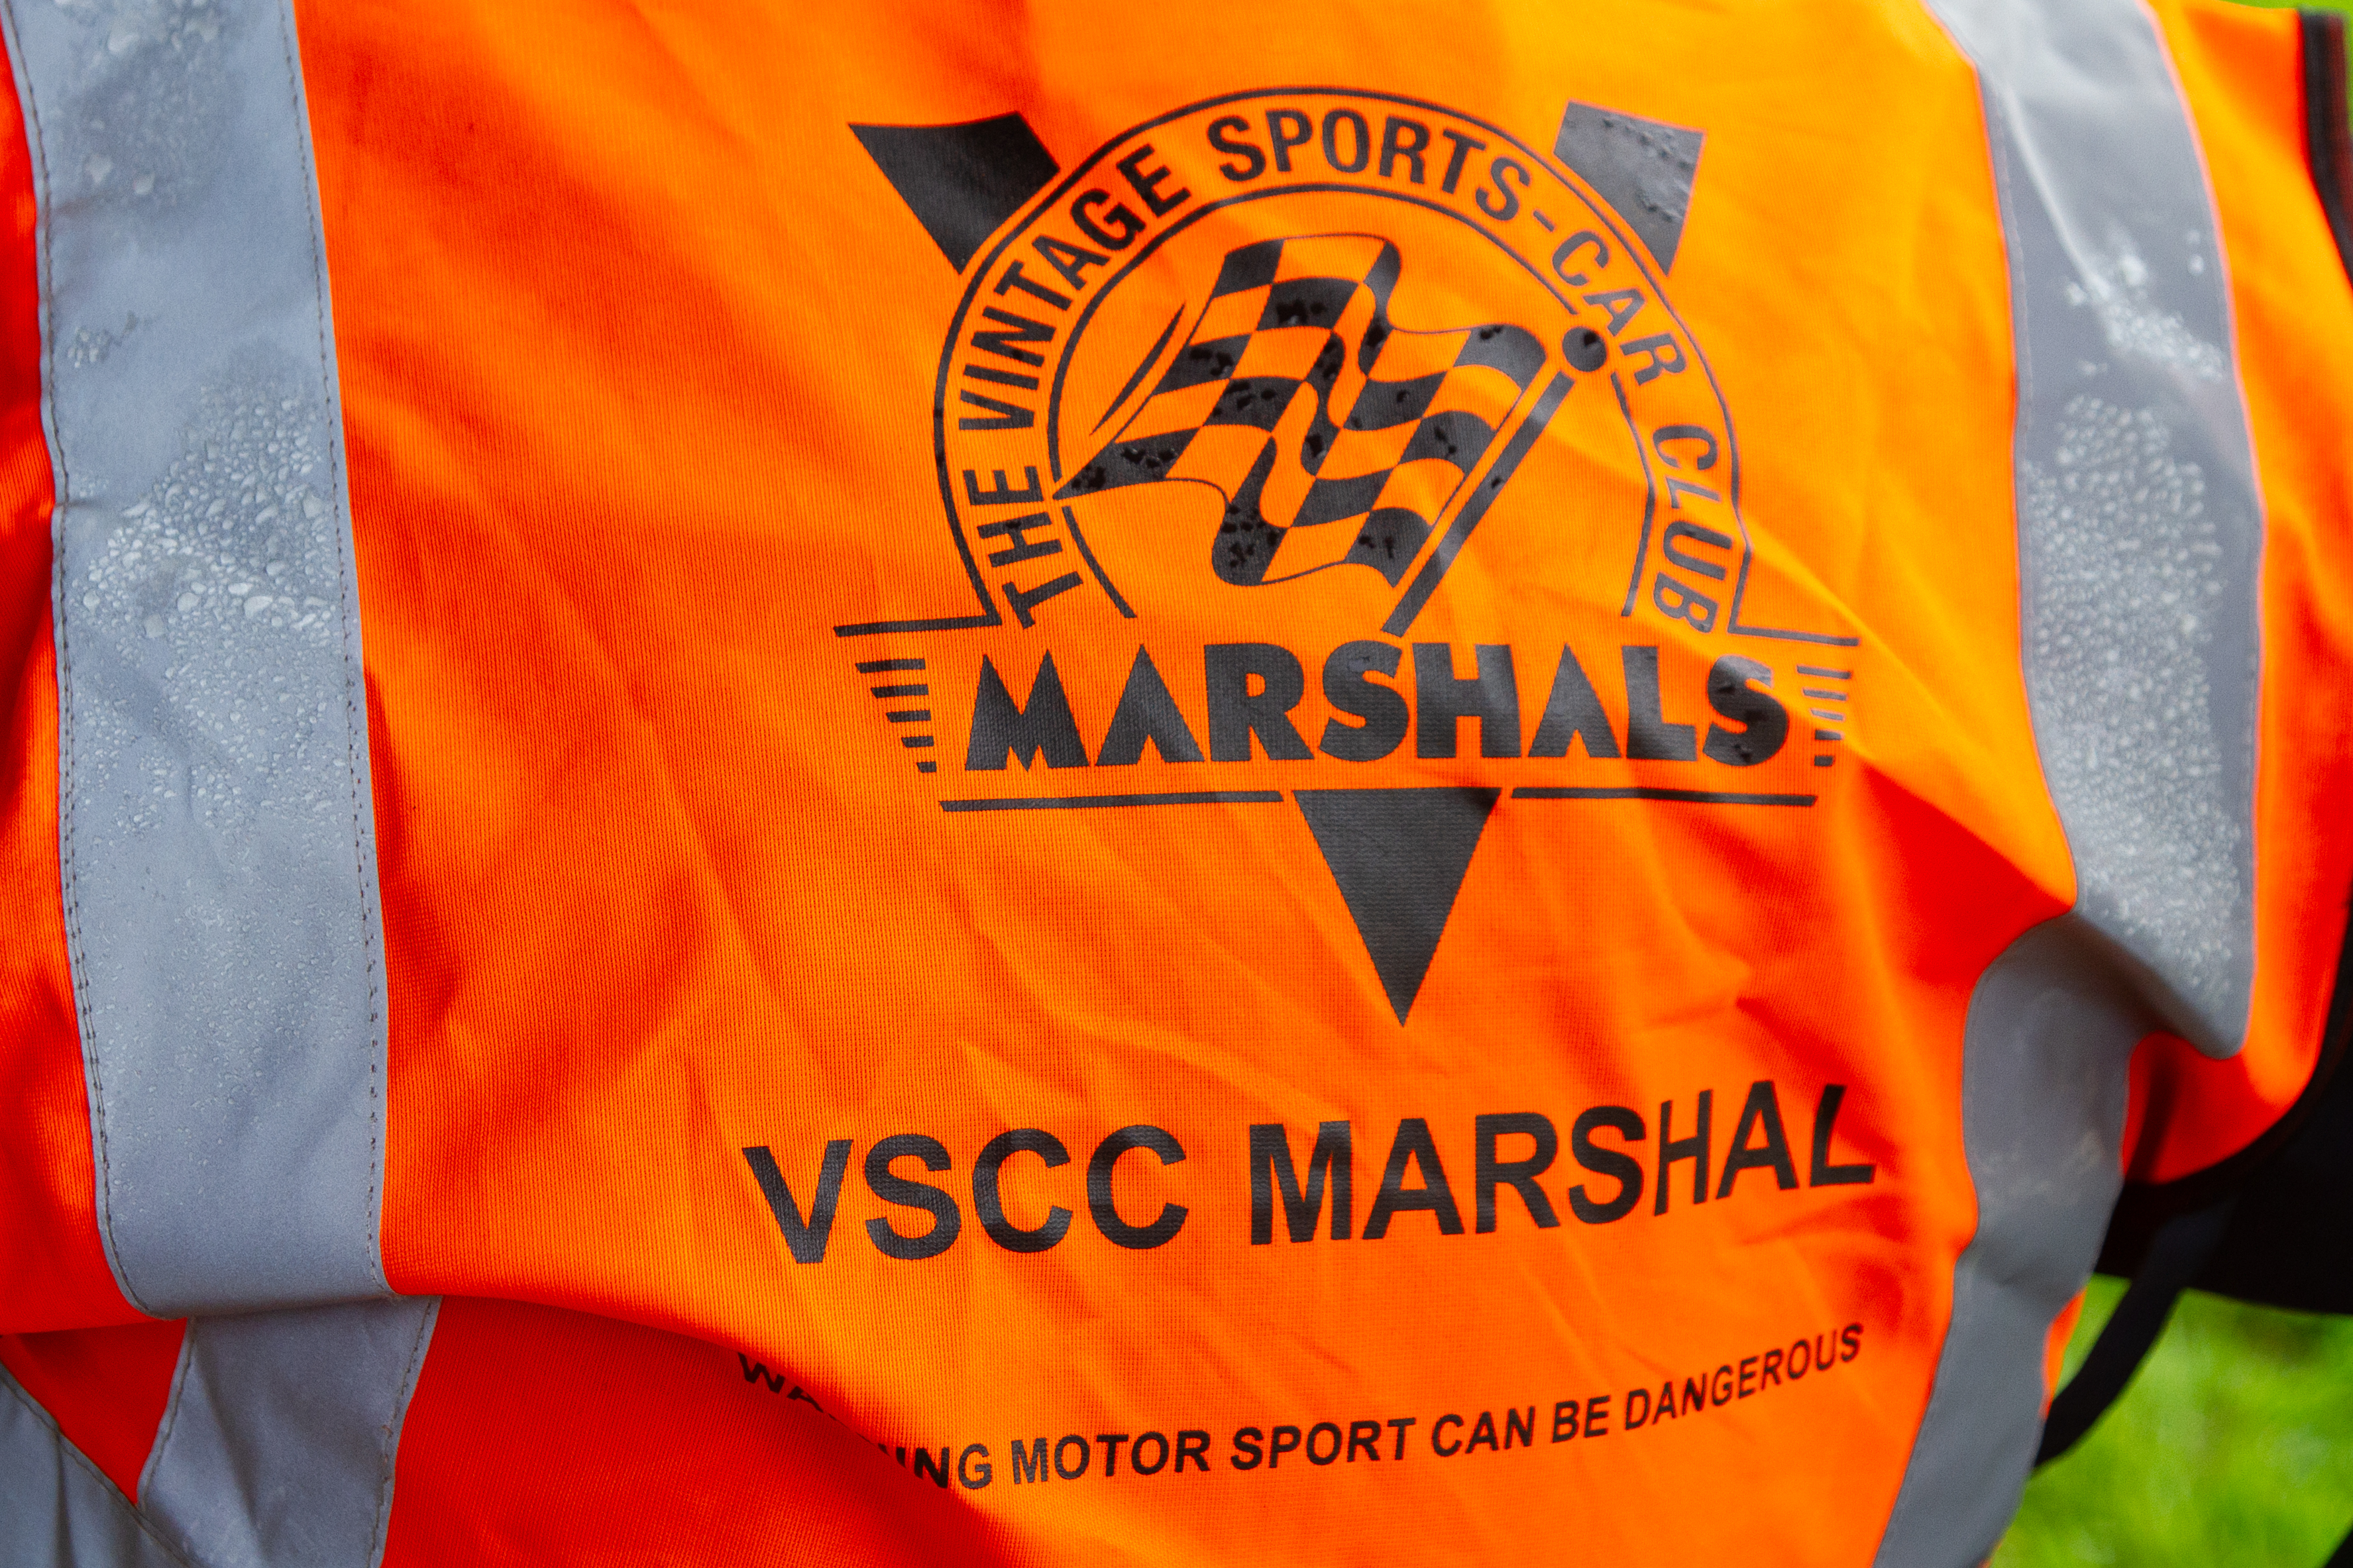 Have you ever thought of becoming a Flag Marshal?